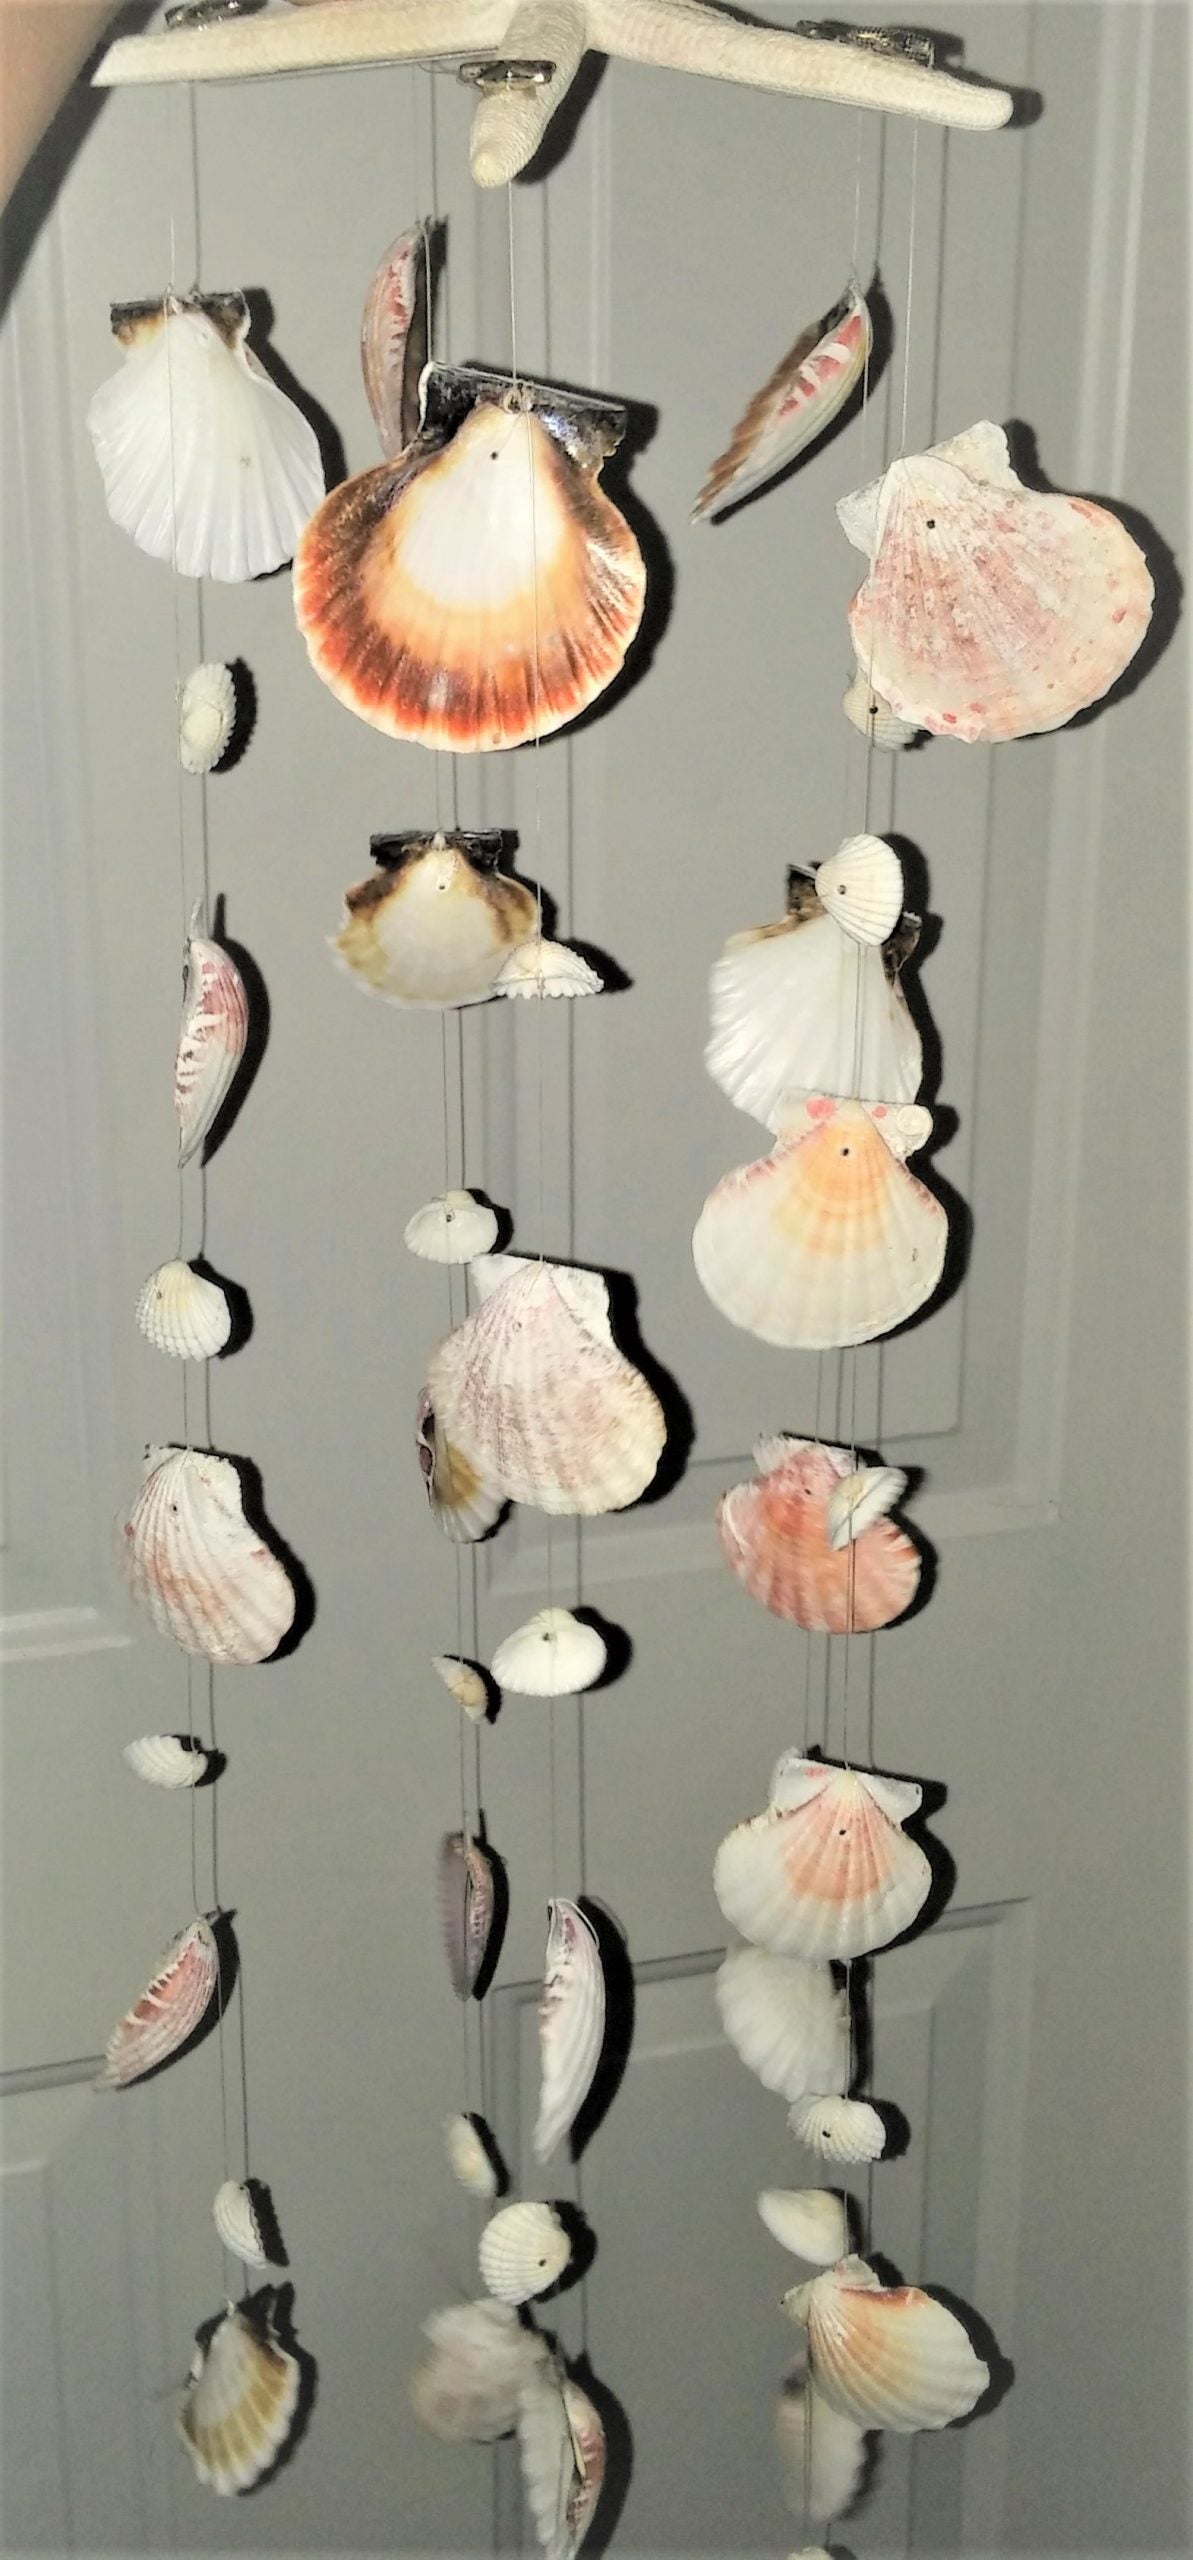 Handcrafted Wind Chimes - Scallop Shells